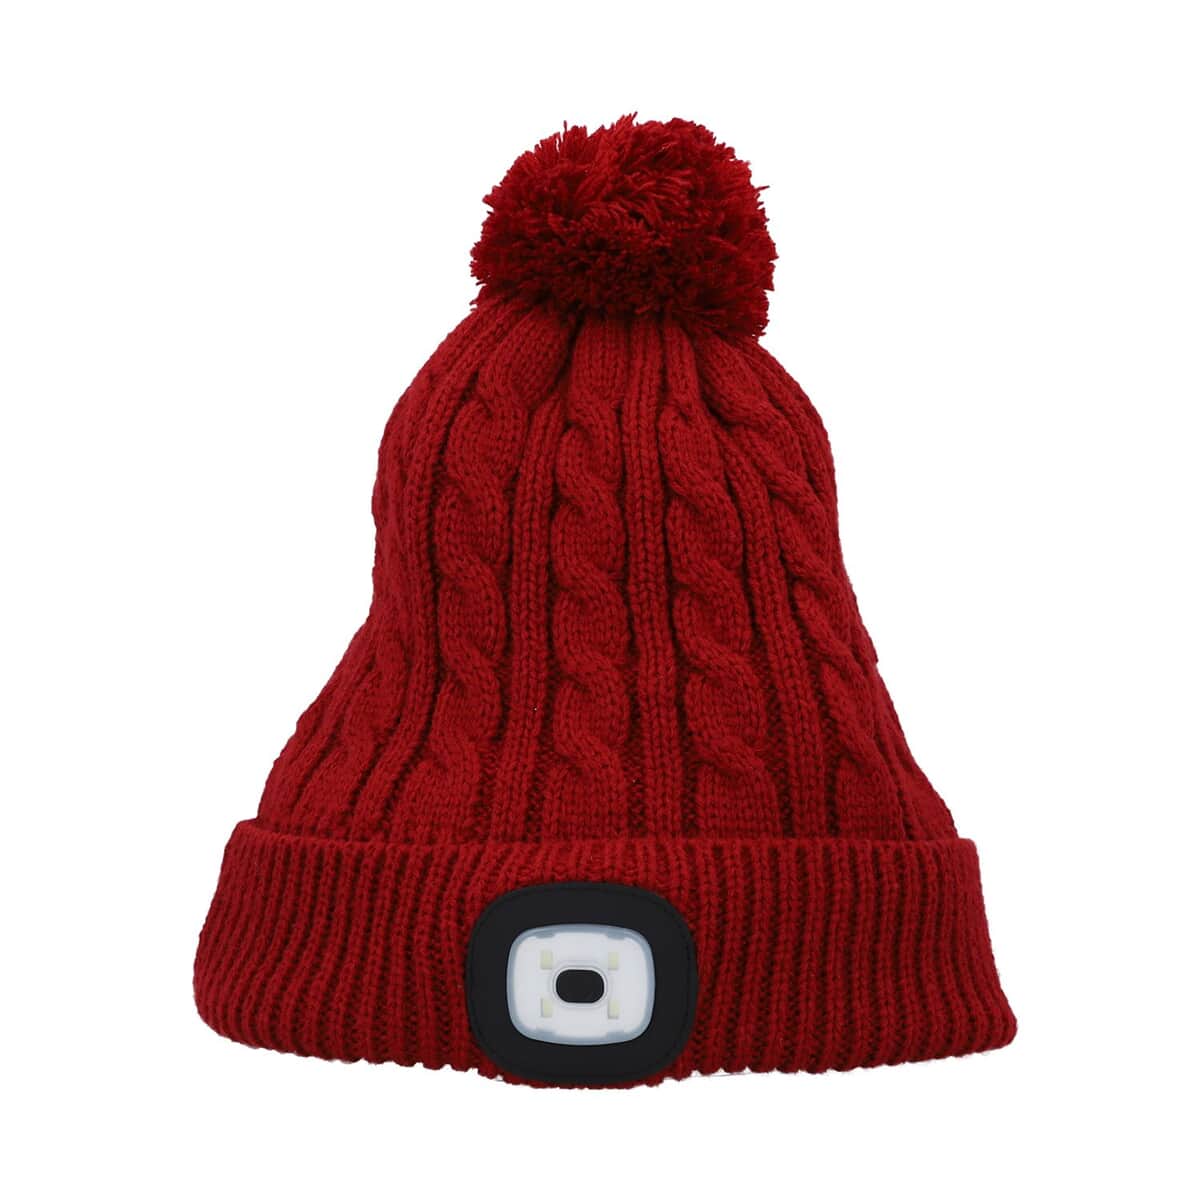 Homesmart Rechargeable Waterproof LED Beanie Hat with Sherpa Lining and Faux Fur Bubbles - Red image number 0